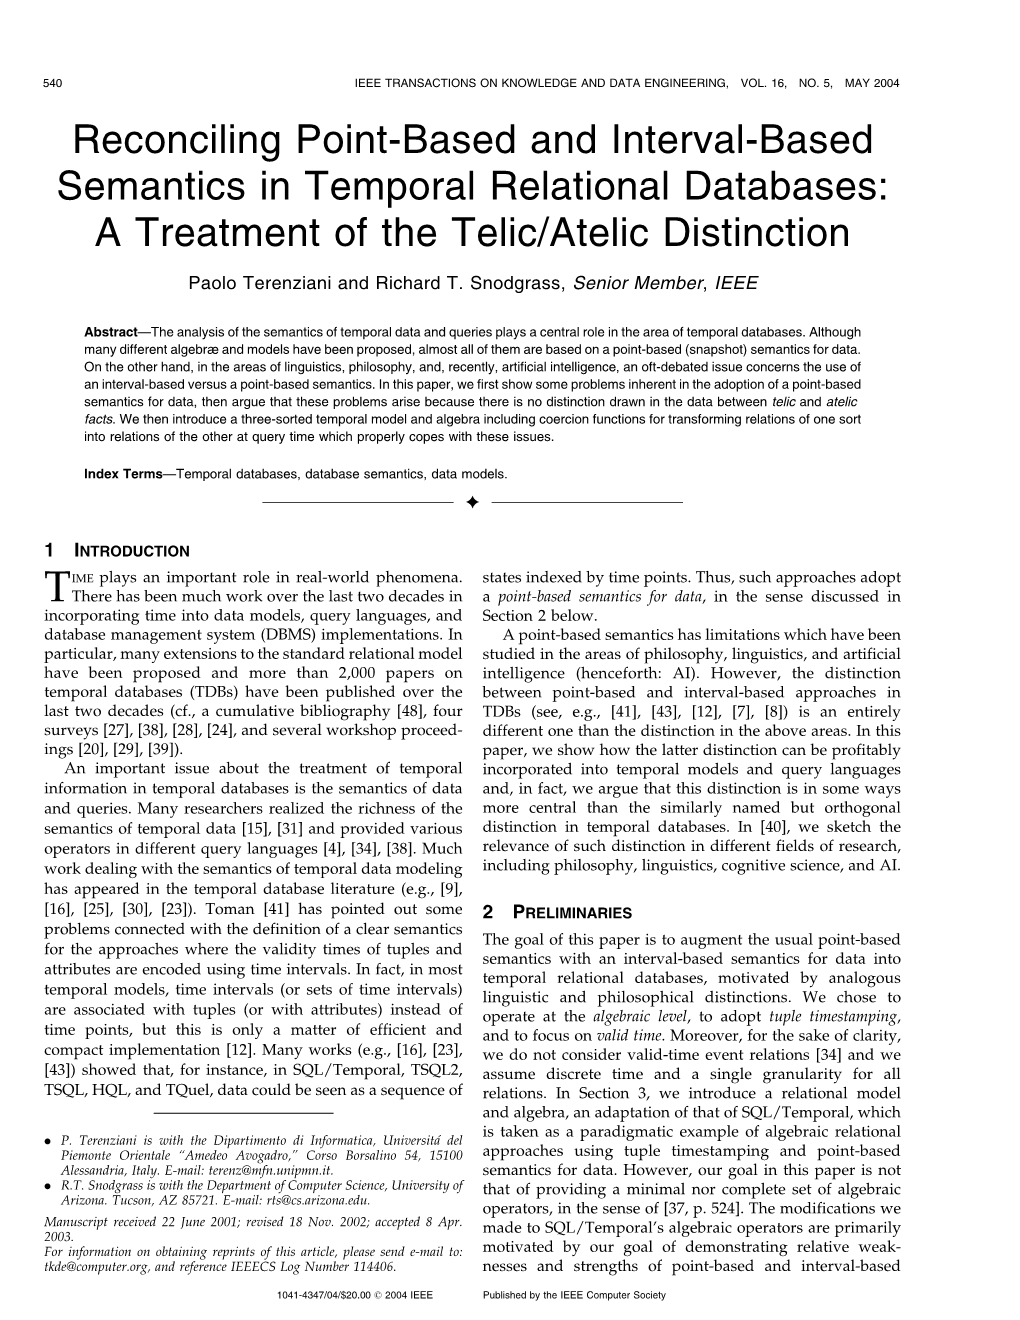 Reconciling Point-Based and Interval-Based Semantics in Temporal Relational Databases: a Treatment of the Telic/Atelic Distinction